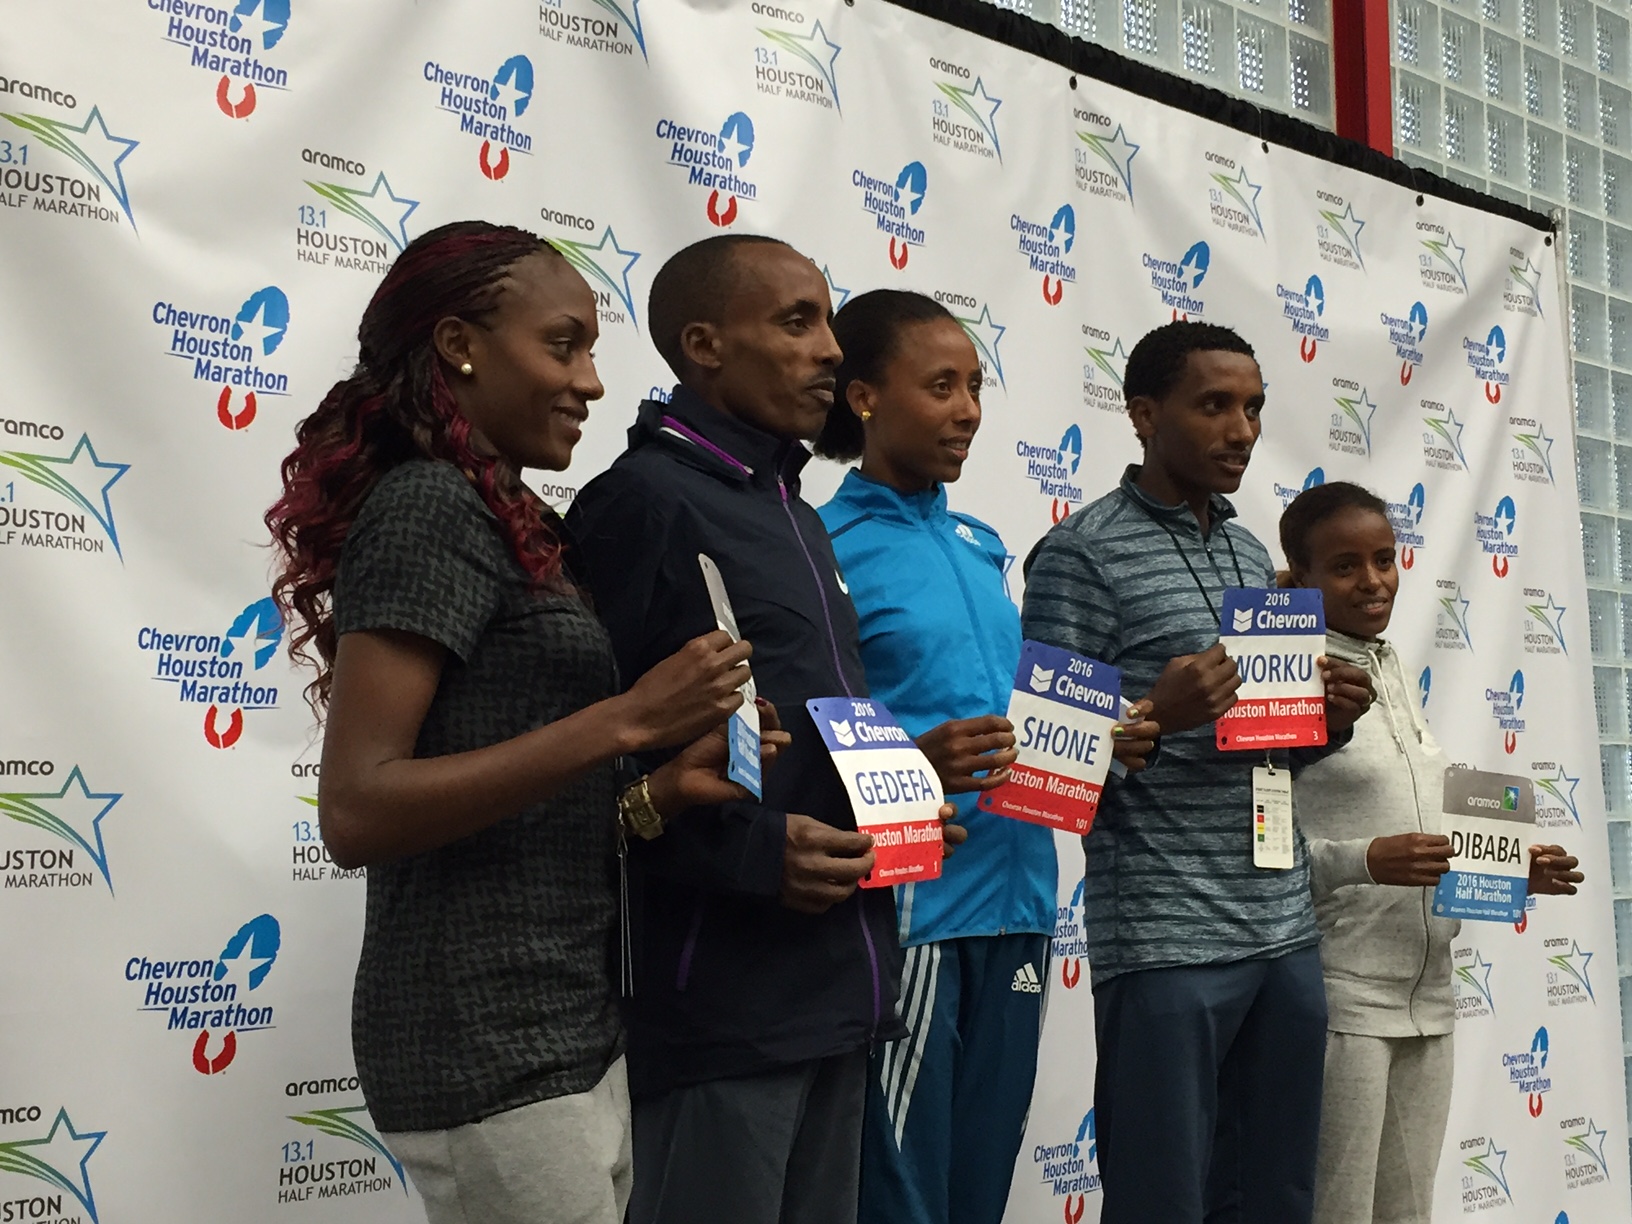 Runners pose for a picture with their marathon bibs at the Chevron Houston Marathon on 1/15/16. 